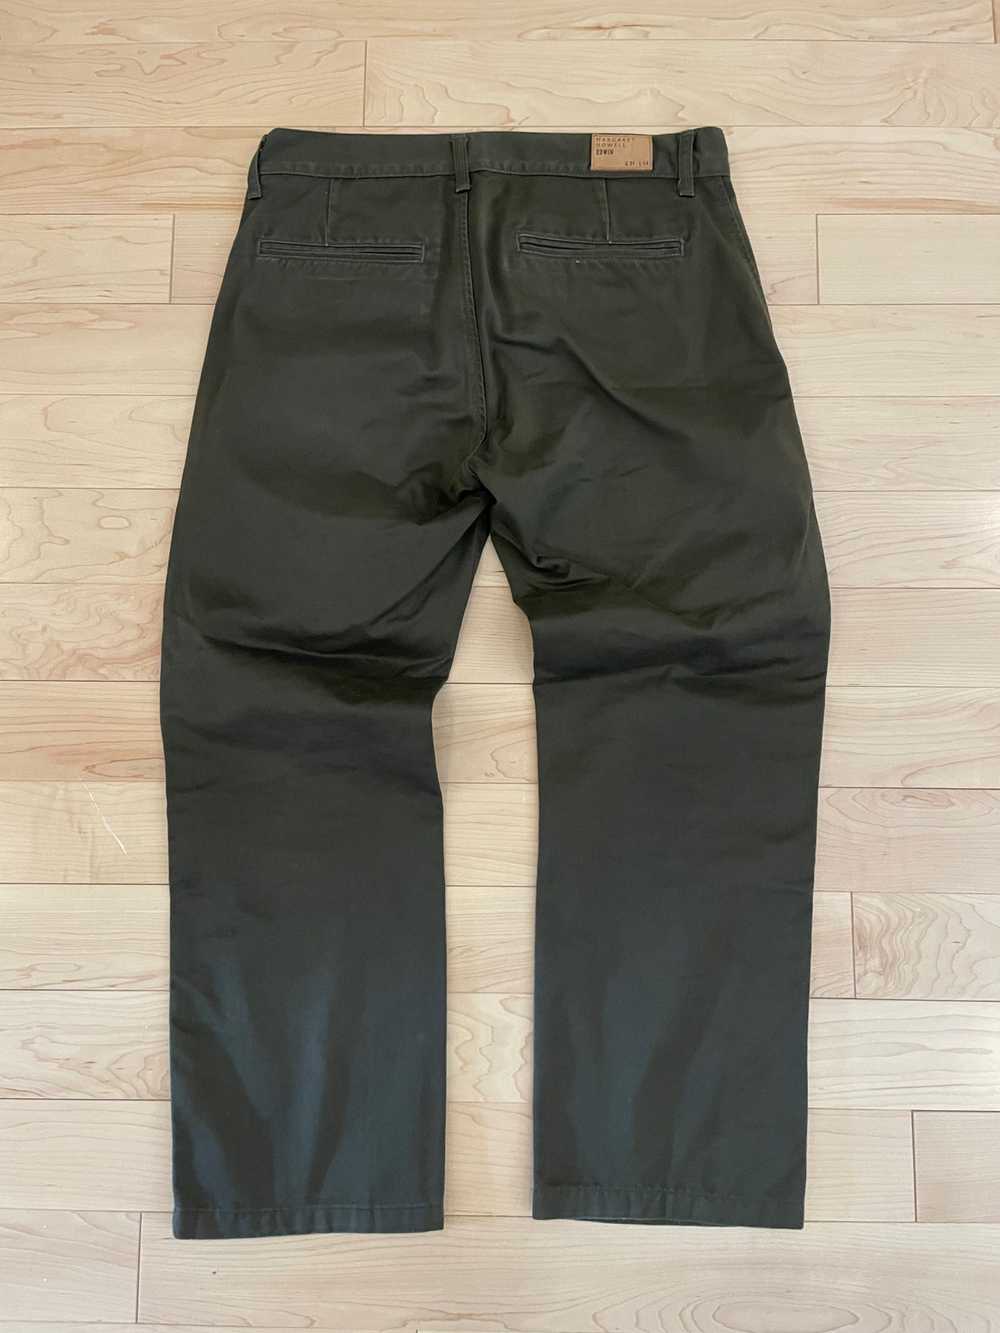 Edwin × Margaret Howell Twill Chinos - image 1